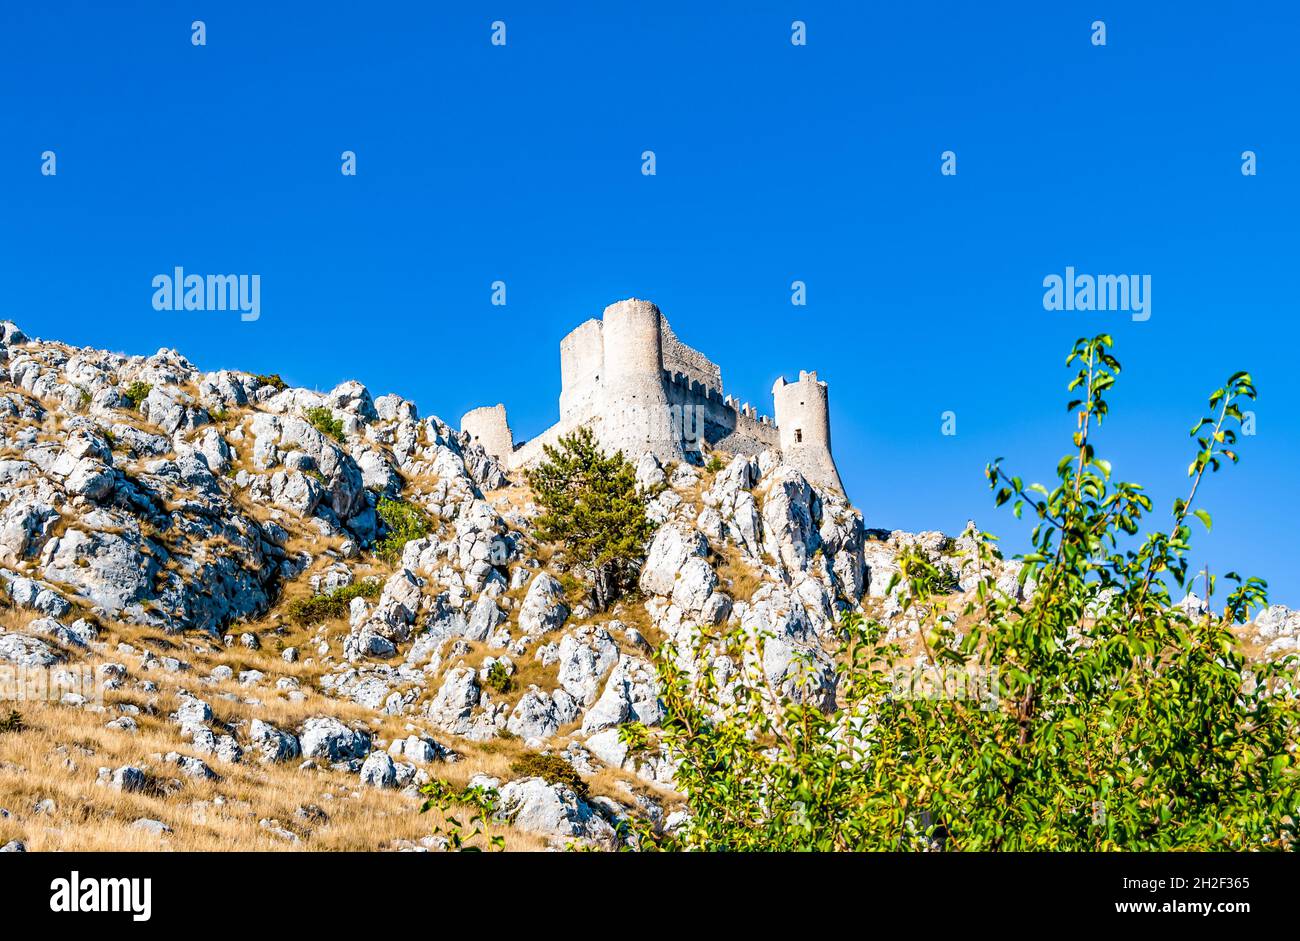 Panoramic view of the medieval mountaintop castle of Rocca Calascio, in the Apennines, in the province of L'Aquila, Abruzzo region, Italy Stock Photo